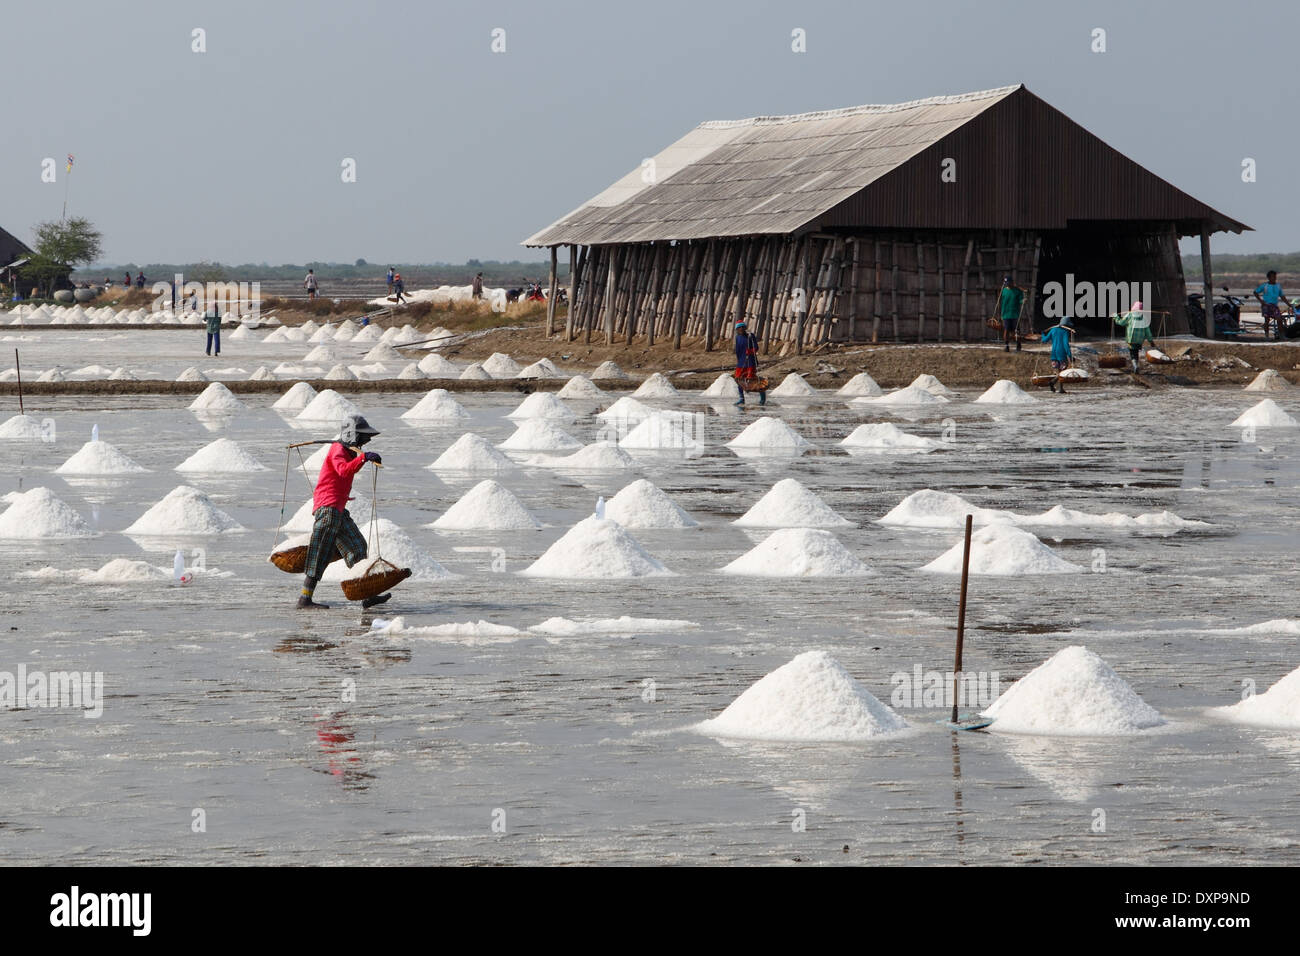 Workers in Thailand collect salt from a saltpan Stock Photo